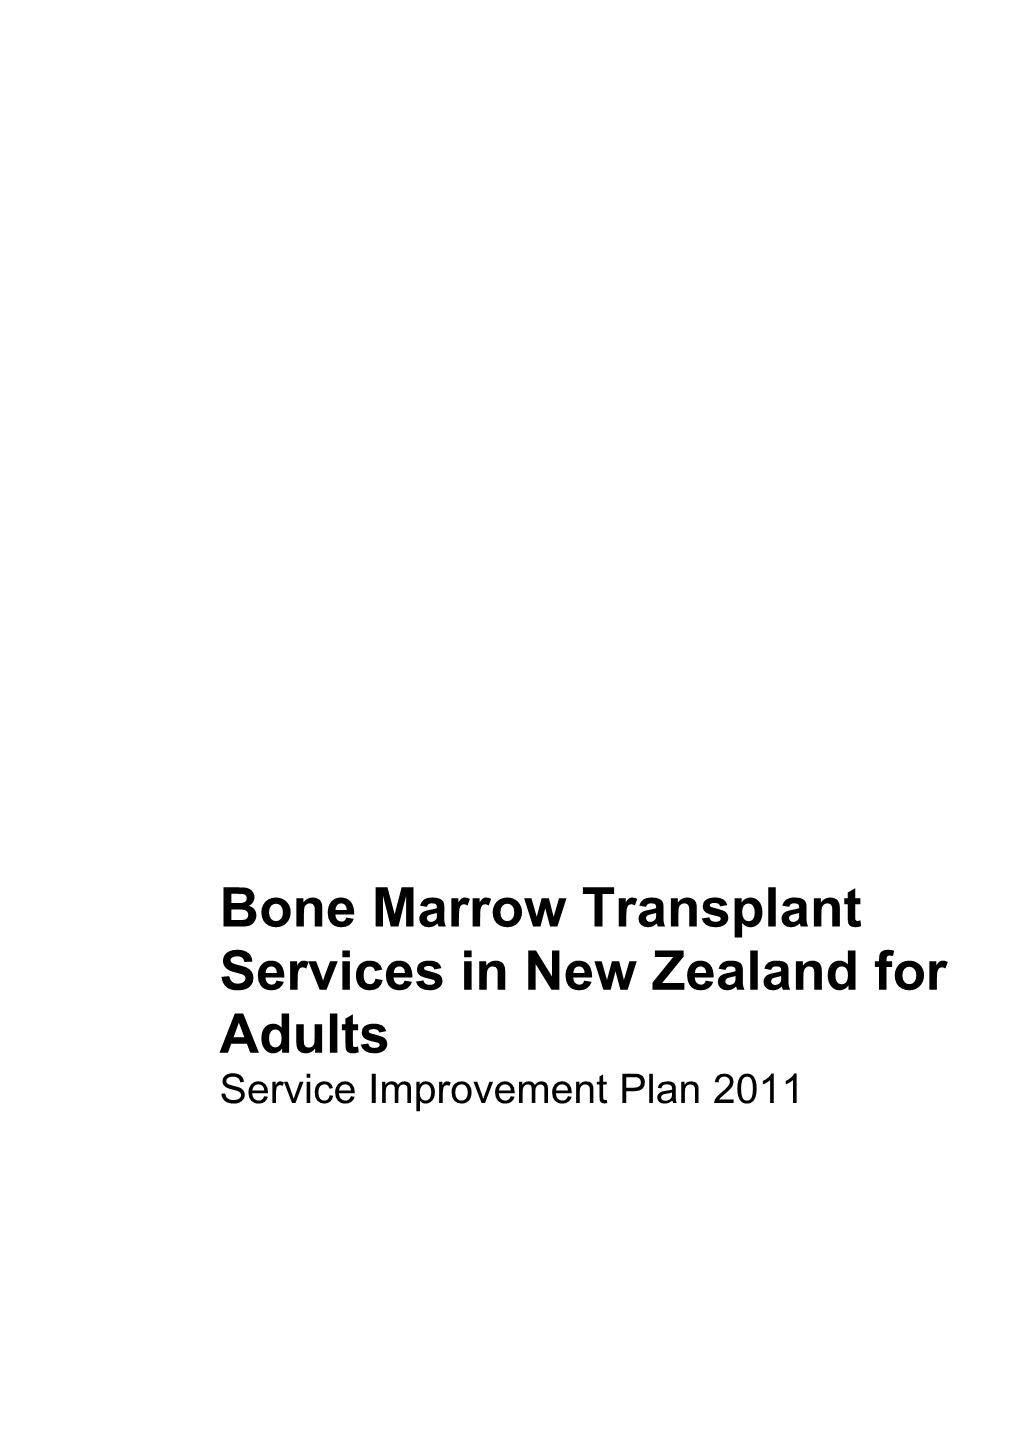 Bone Marrow Transplant Services in New Zealand for Adults